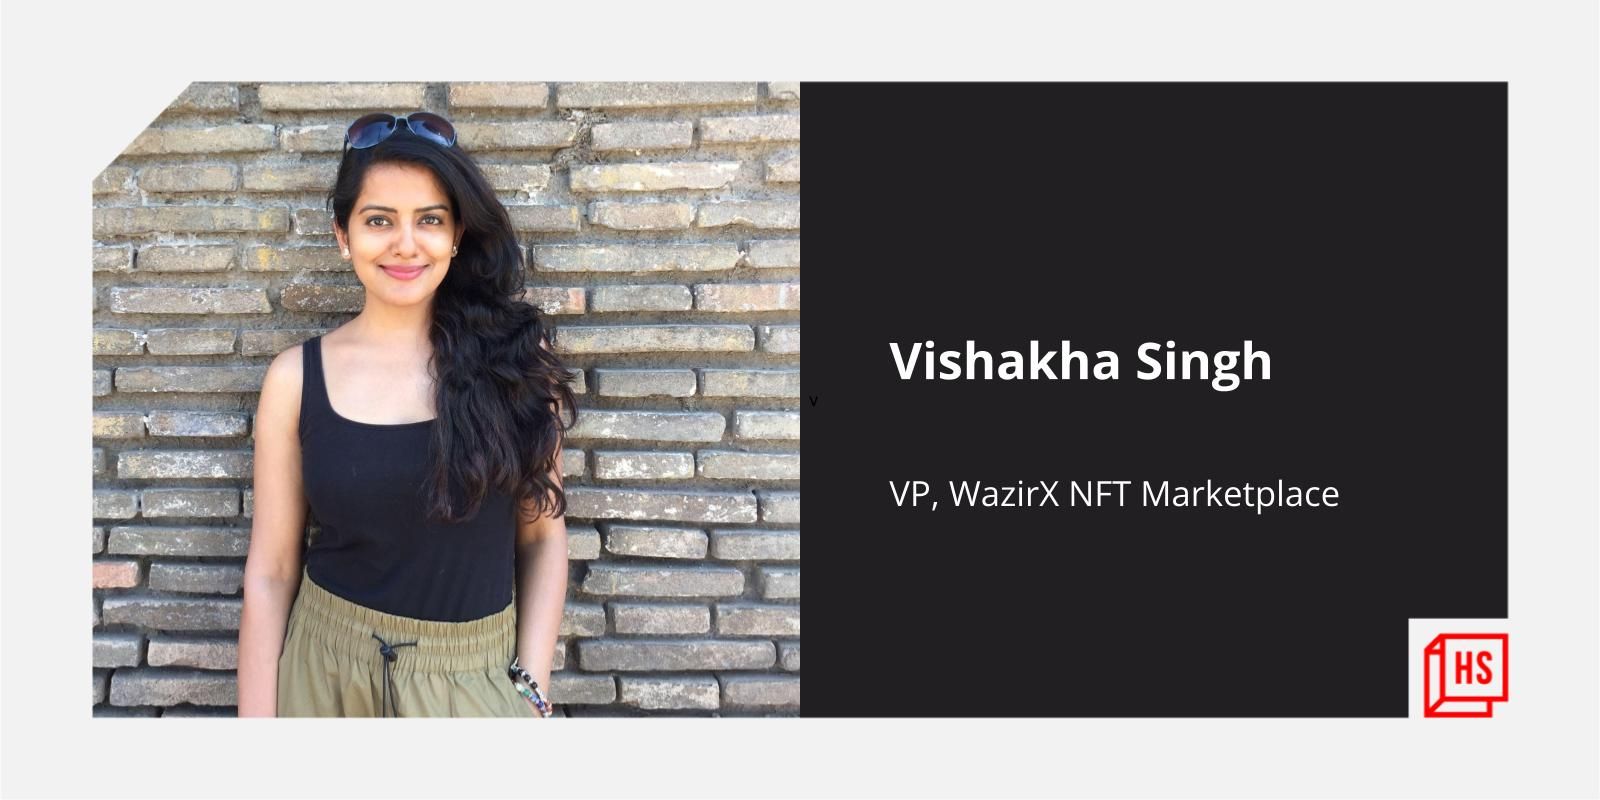 Underlying traits of being an actor and a startup founder are same: WazirX Marketplace Co-Founder Vishakha Singh
